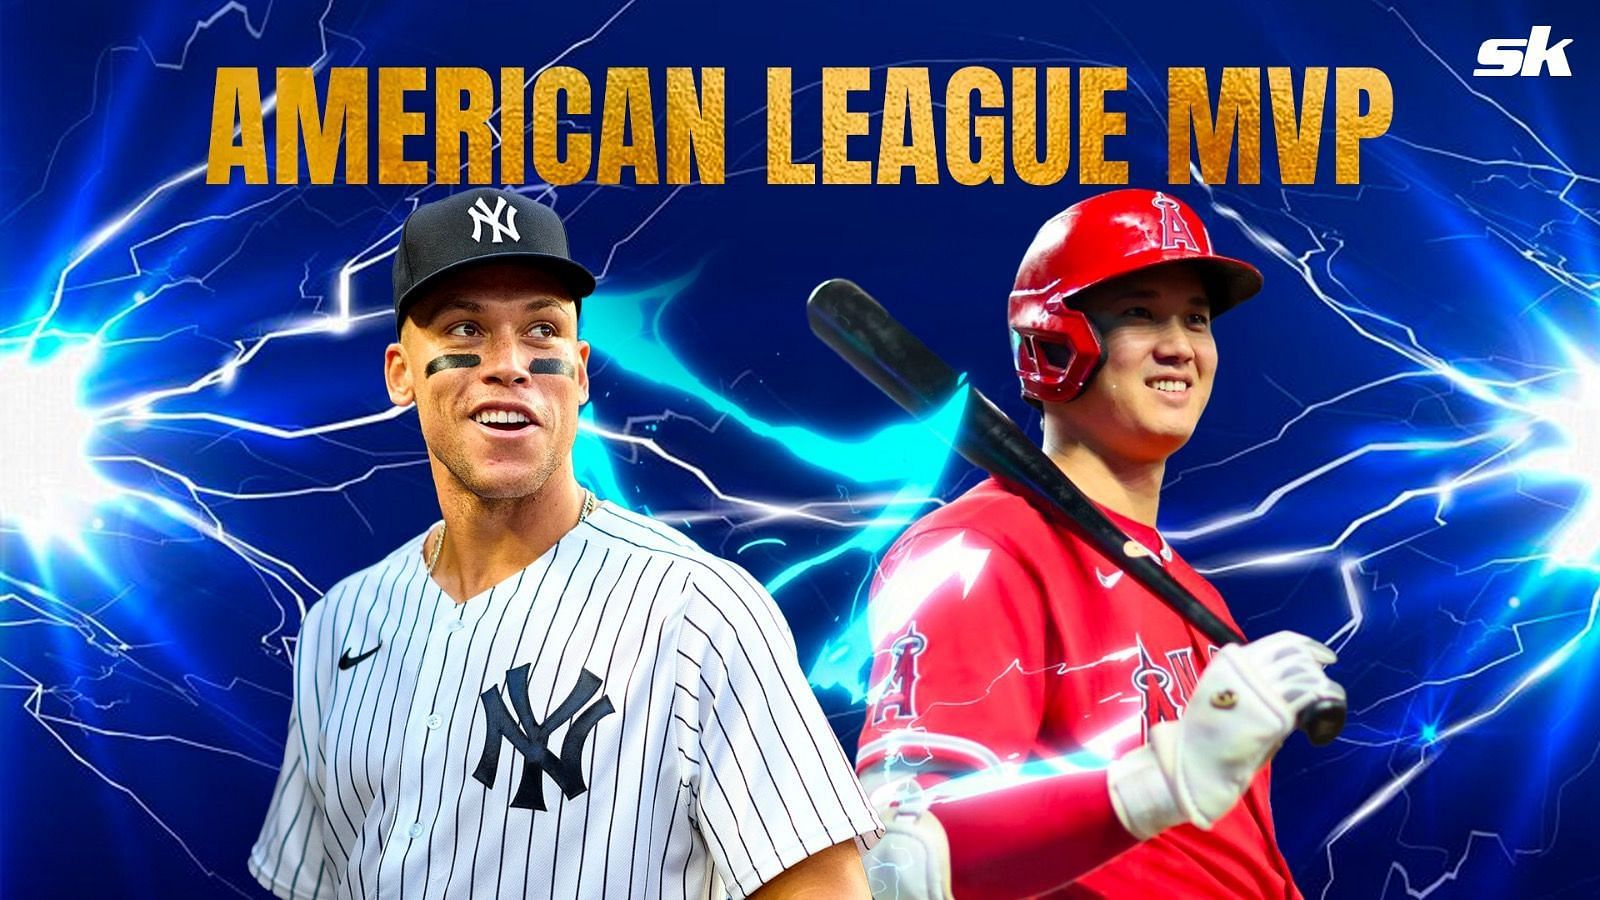 Aaron Judge of the New York Yankees and Shohei Ohtani of the LA Angels